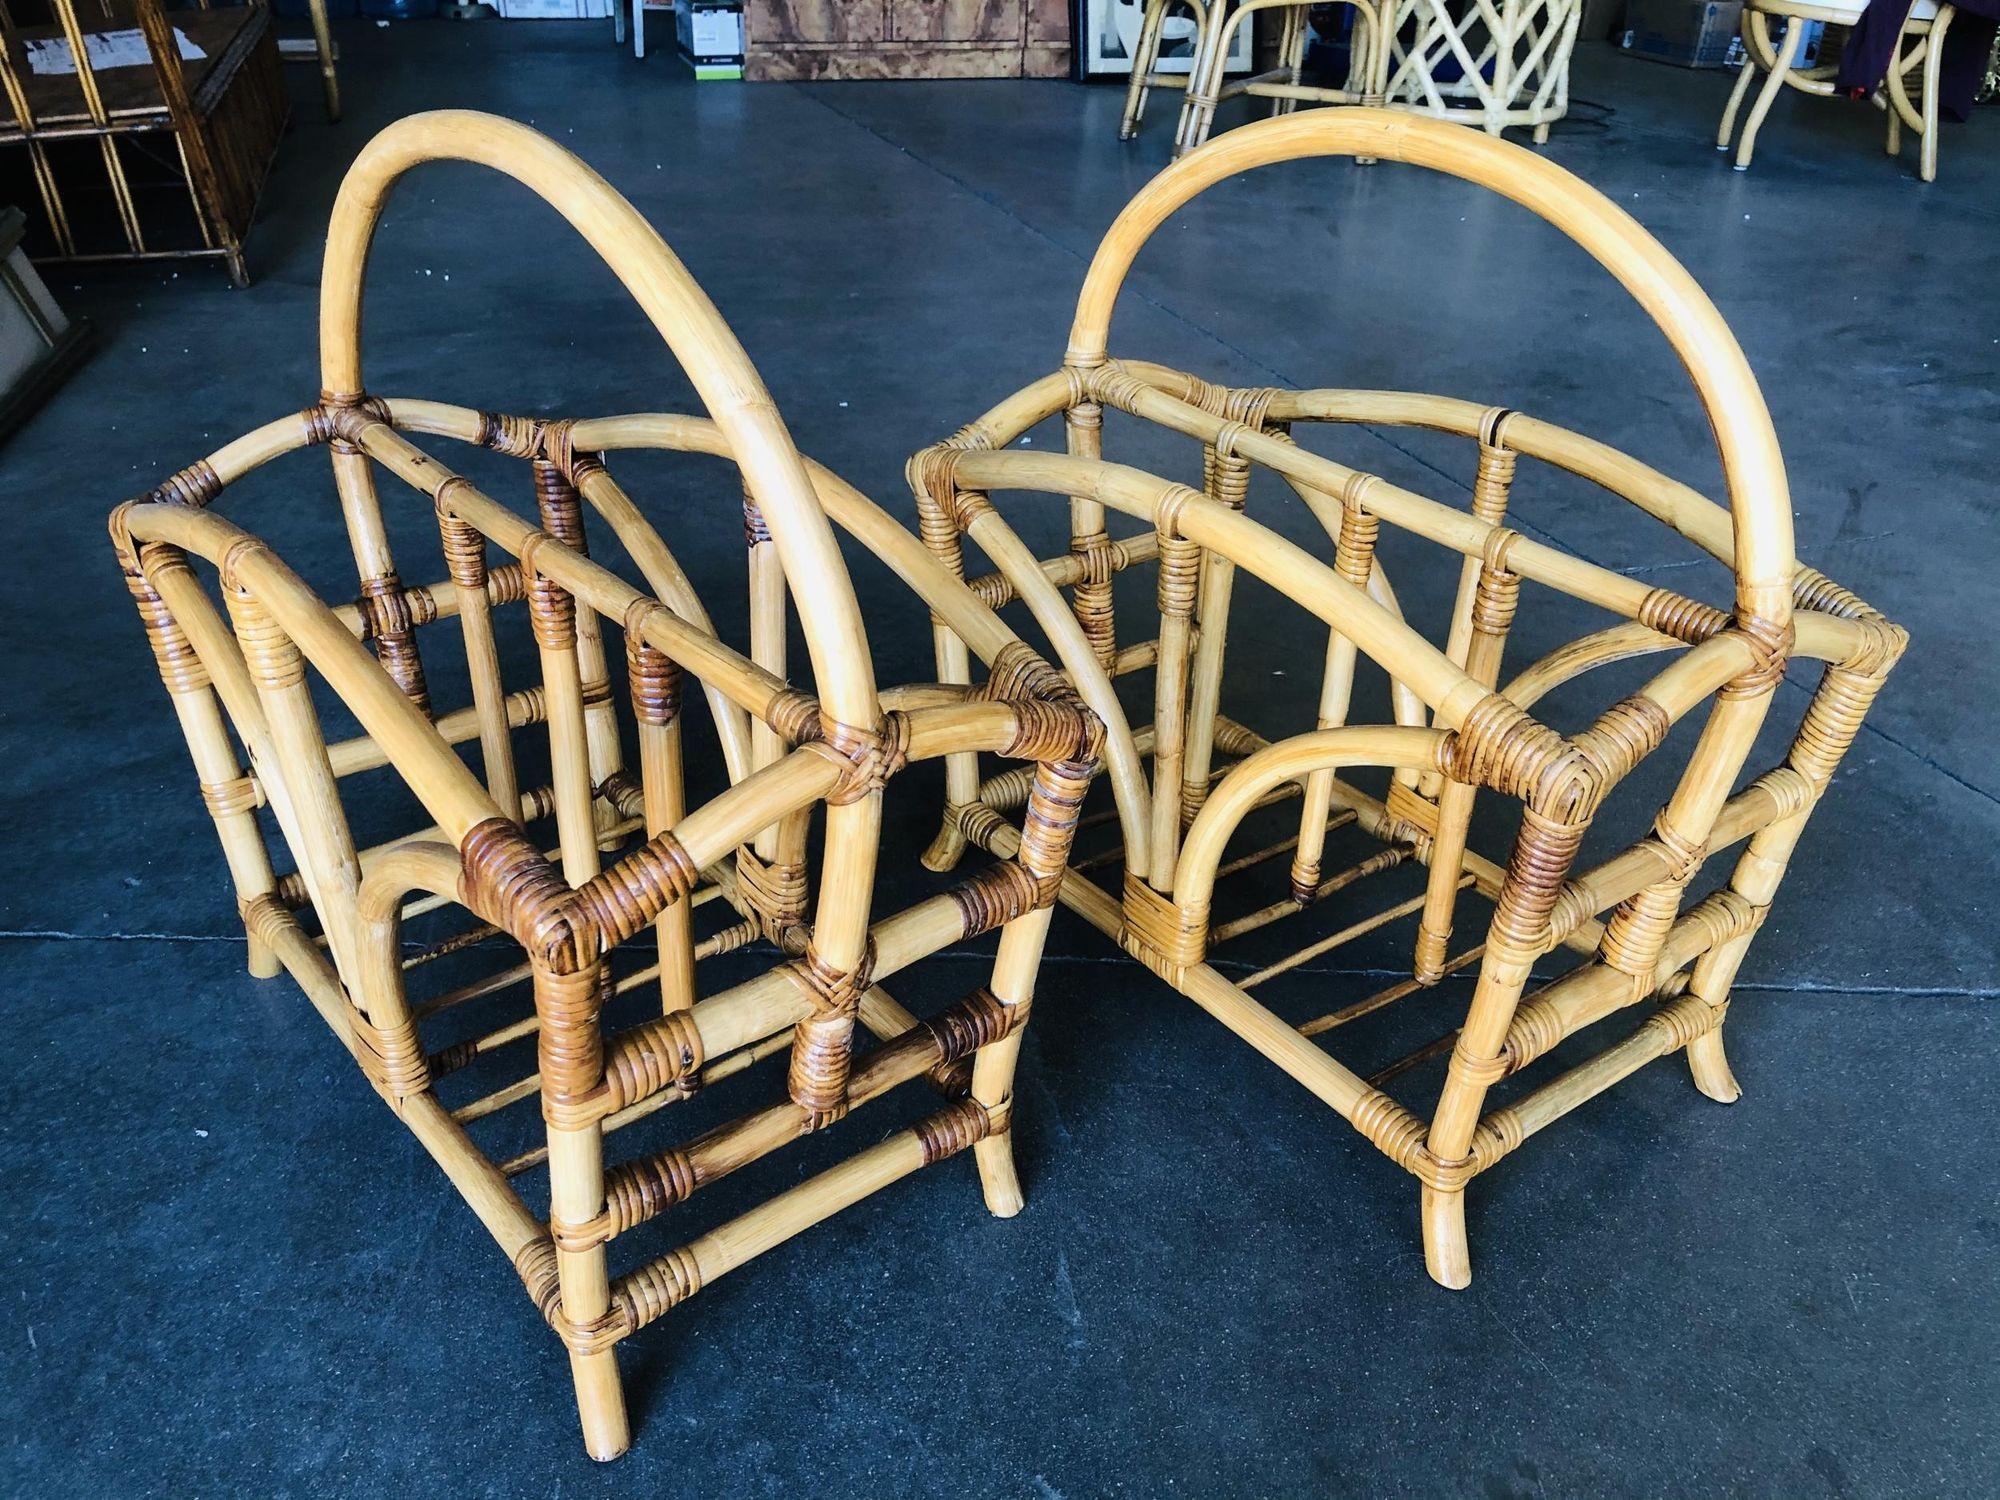 Restored pair of rattan magazine racks with a palm-leaf pattern on each side. A great example of early modern rattan design.

1940, United States

We only purchase and sell only the best and finest rattan furniture made by the best and most